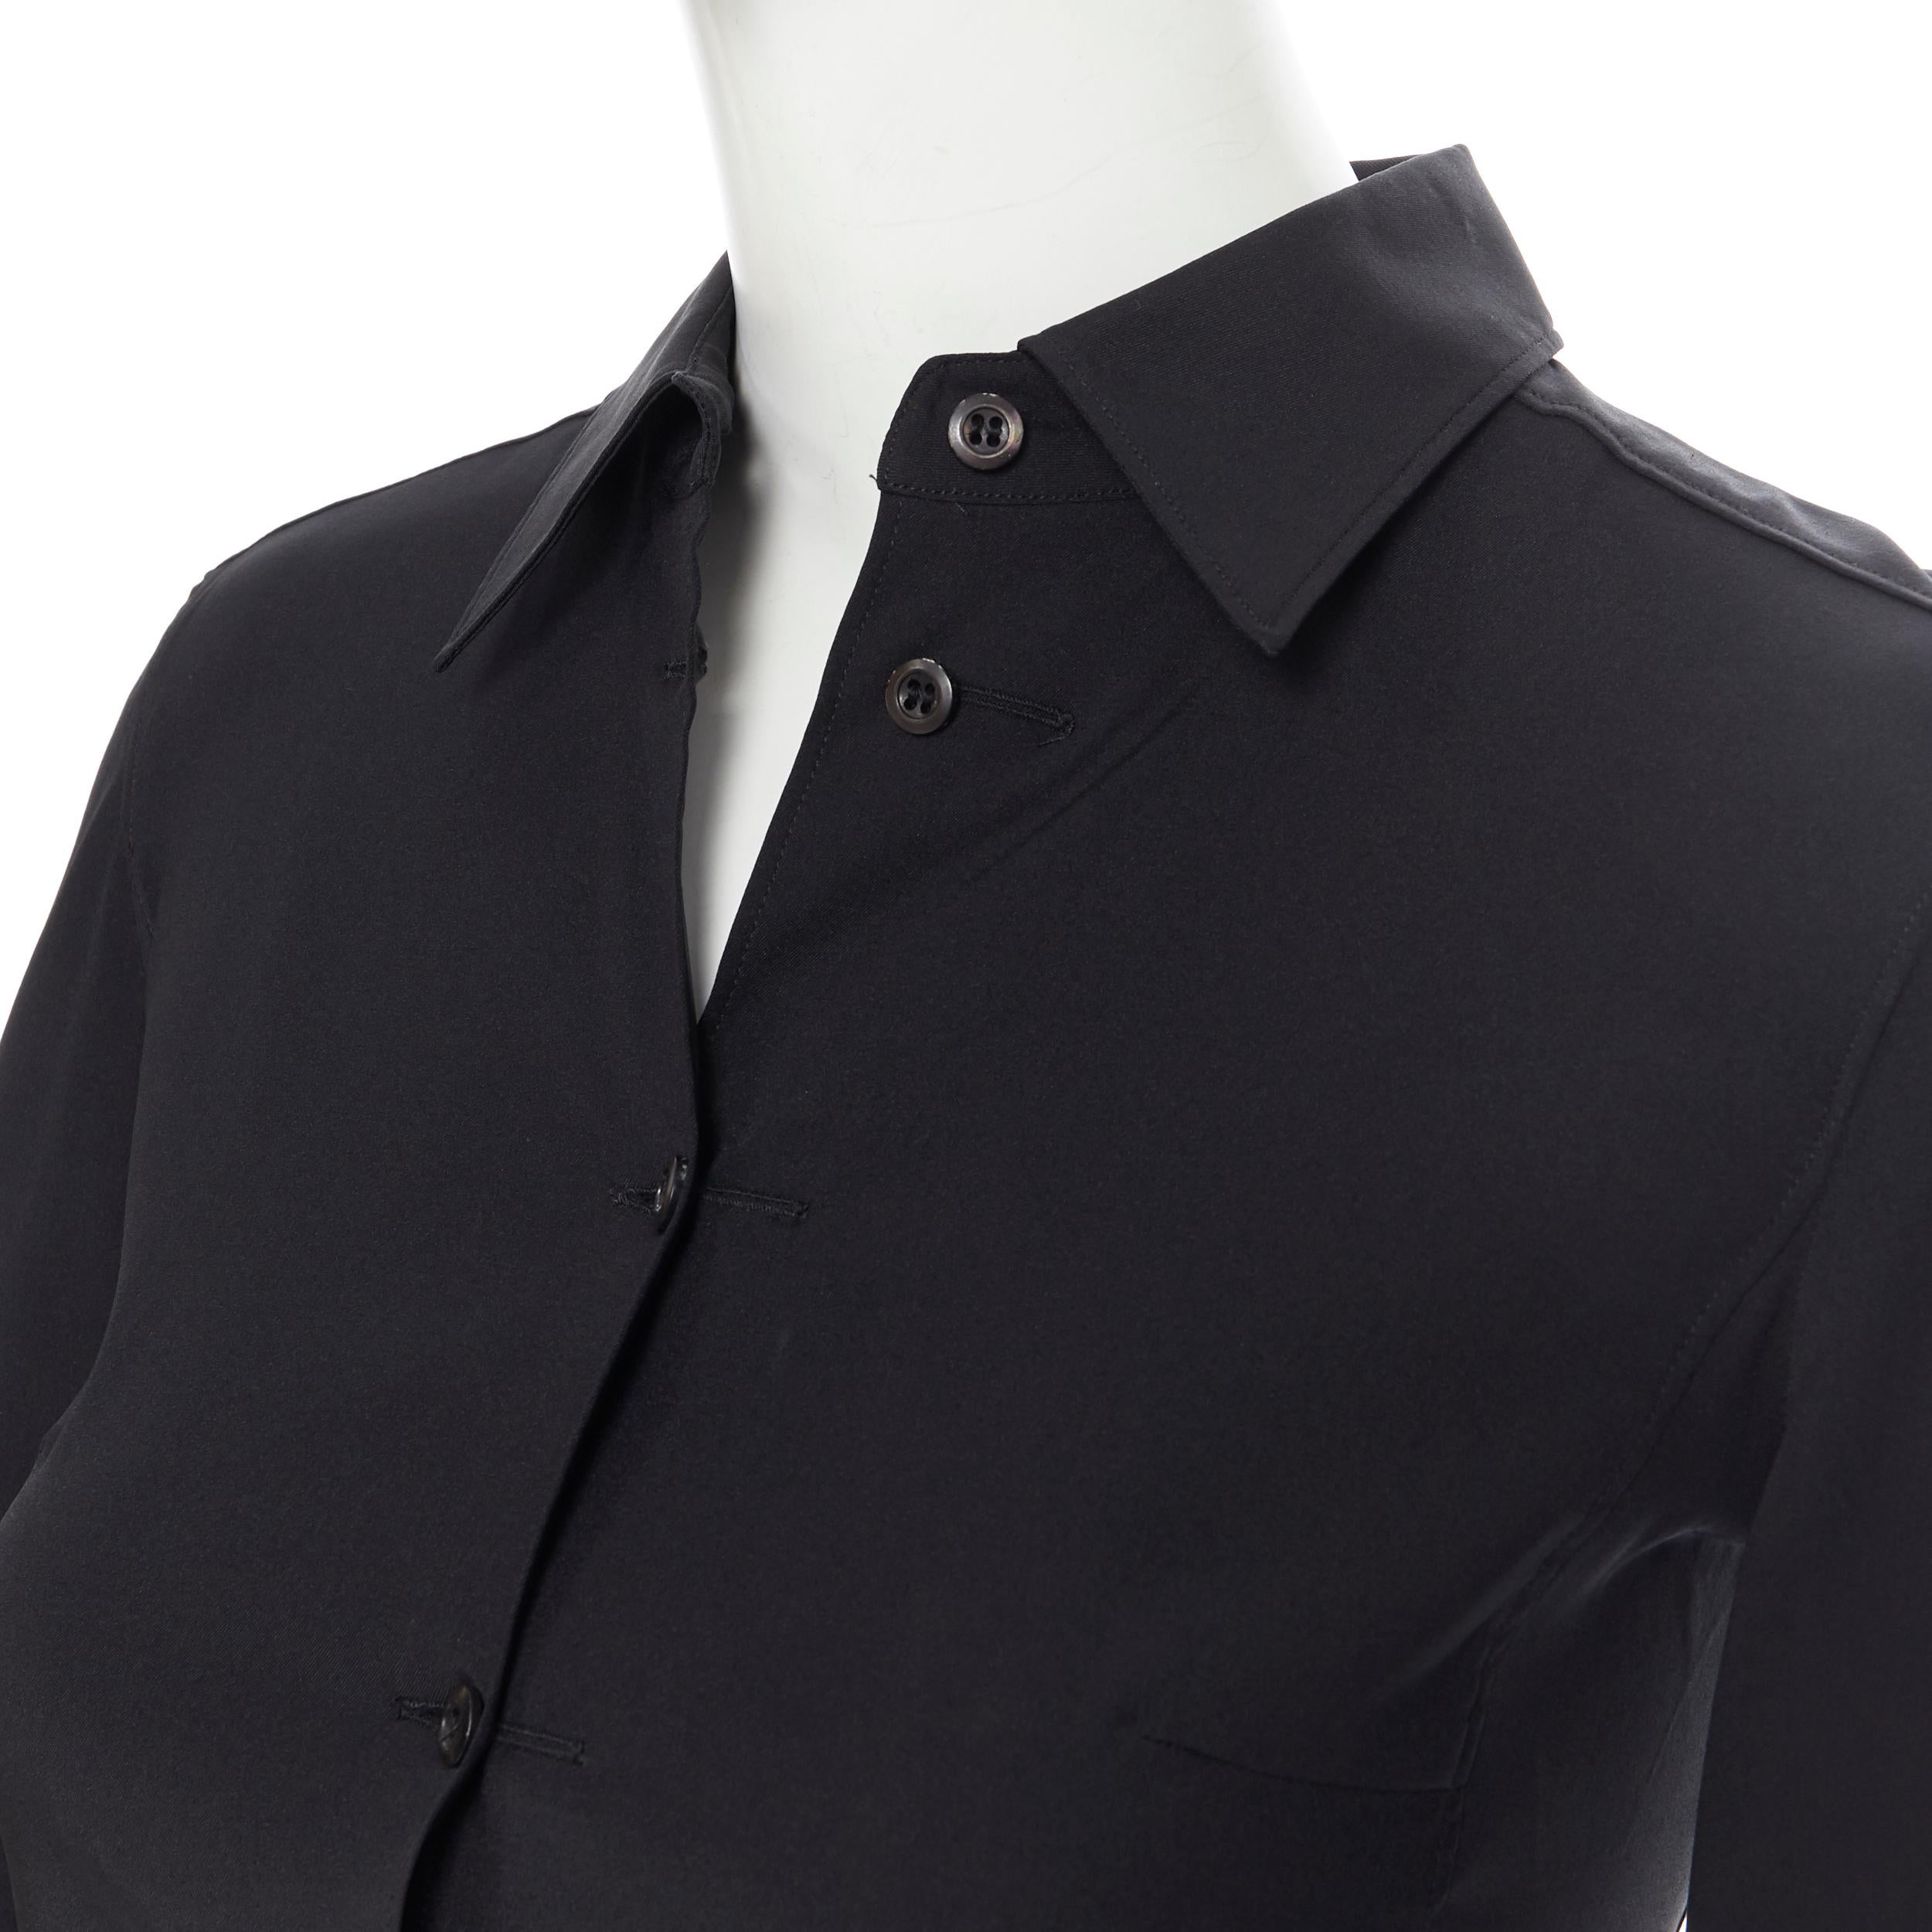 vintage PRADA black silk blend button front cropped 3/4 sleeve shirt top IT38 XS
Brand: Prada
Model Name / Style: Crop top
Material: Silk, blend
Color: Black
Pattern: Solid
Closure: Button
Extra Detail: Bust dart. 3/4 sleeve. Short bodice fit.
Made